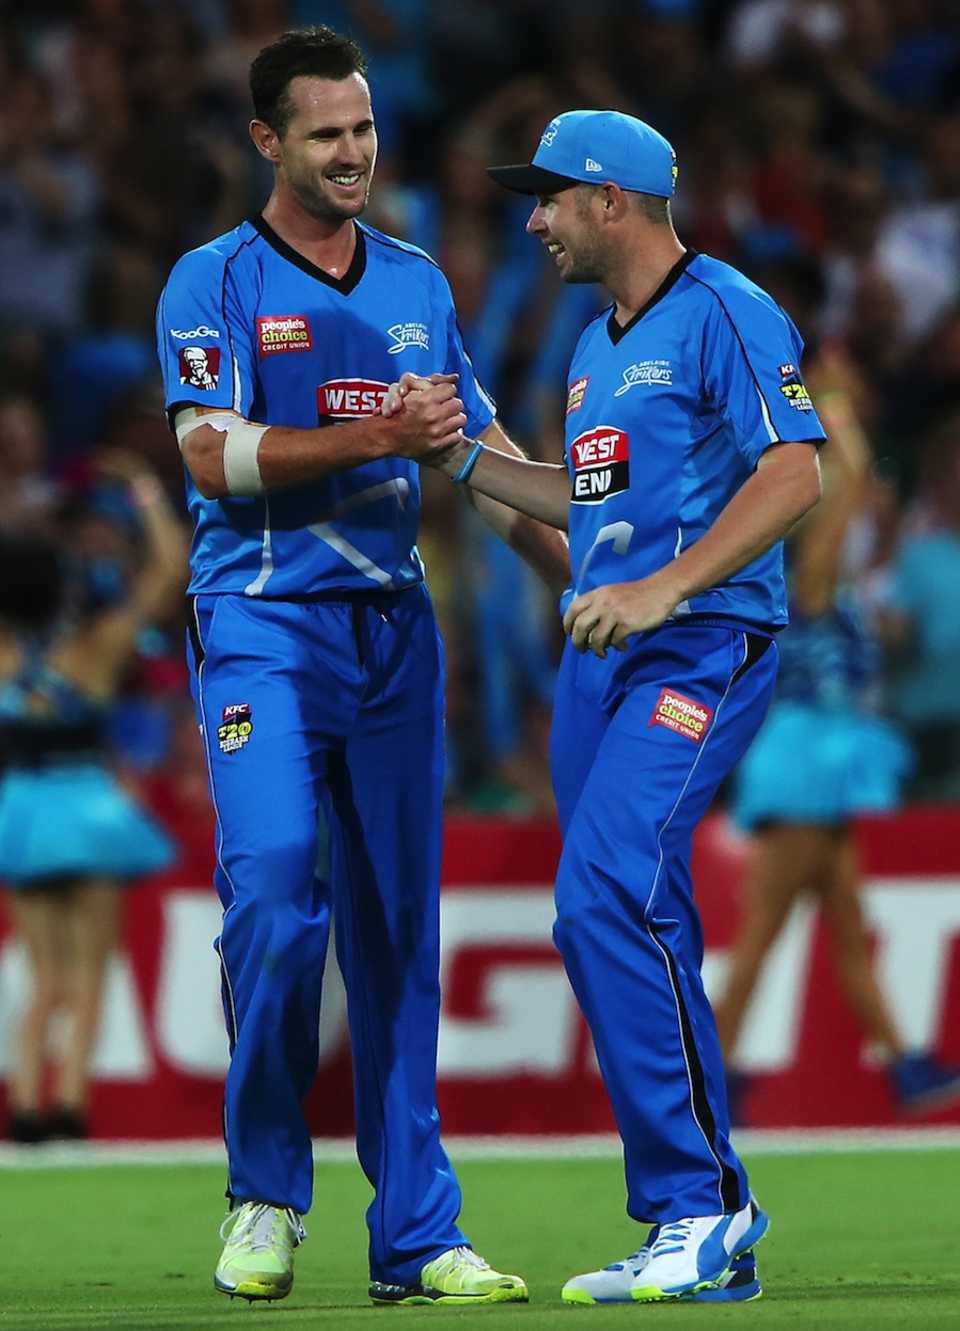 Shaun Tait is congratulated after taking a wicket, Adelaide Strikers v Melbourne Renegades, Big Bash League, Adelaide, January 22, 2014